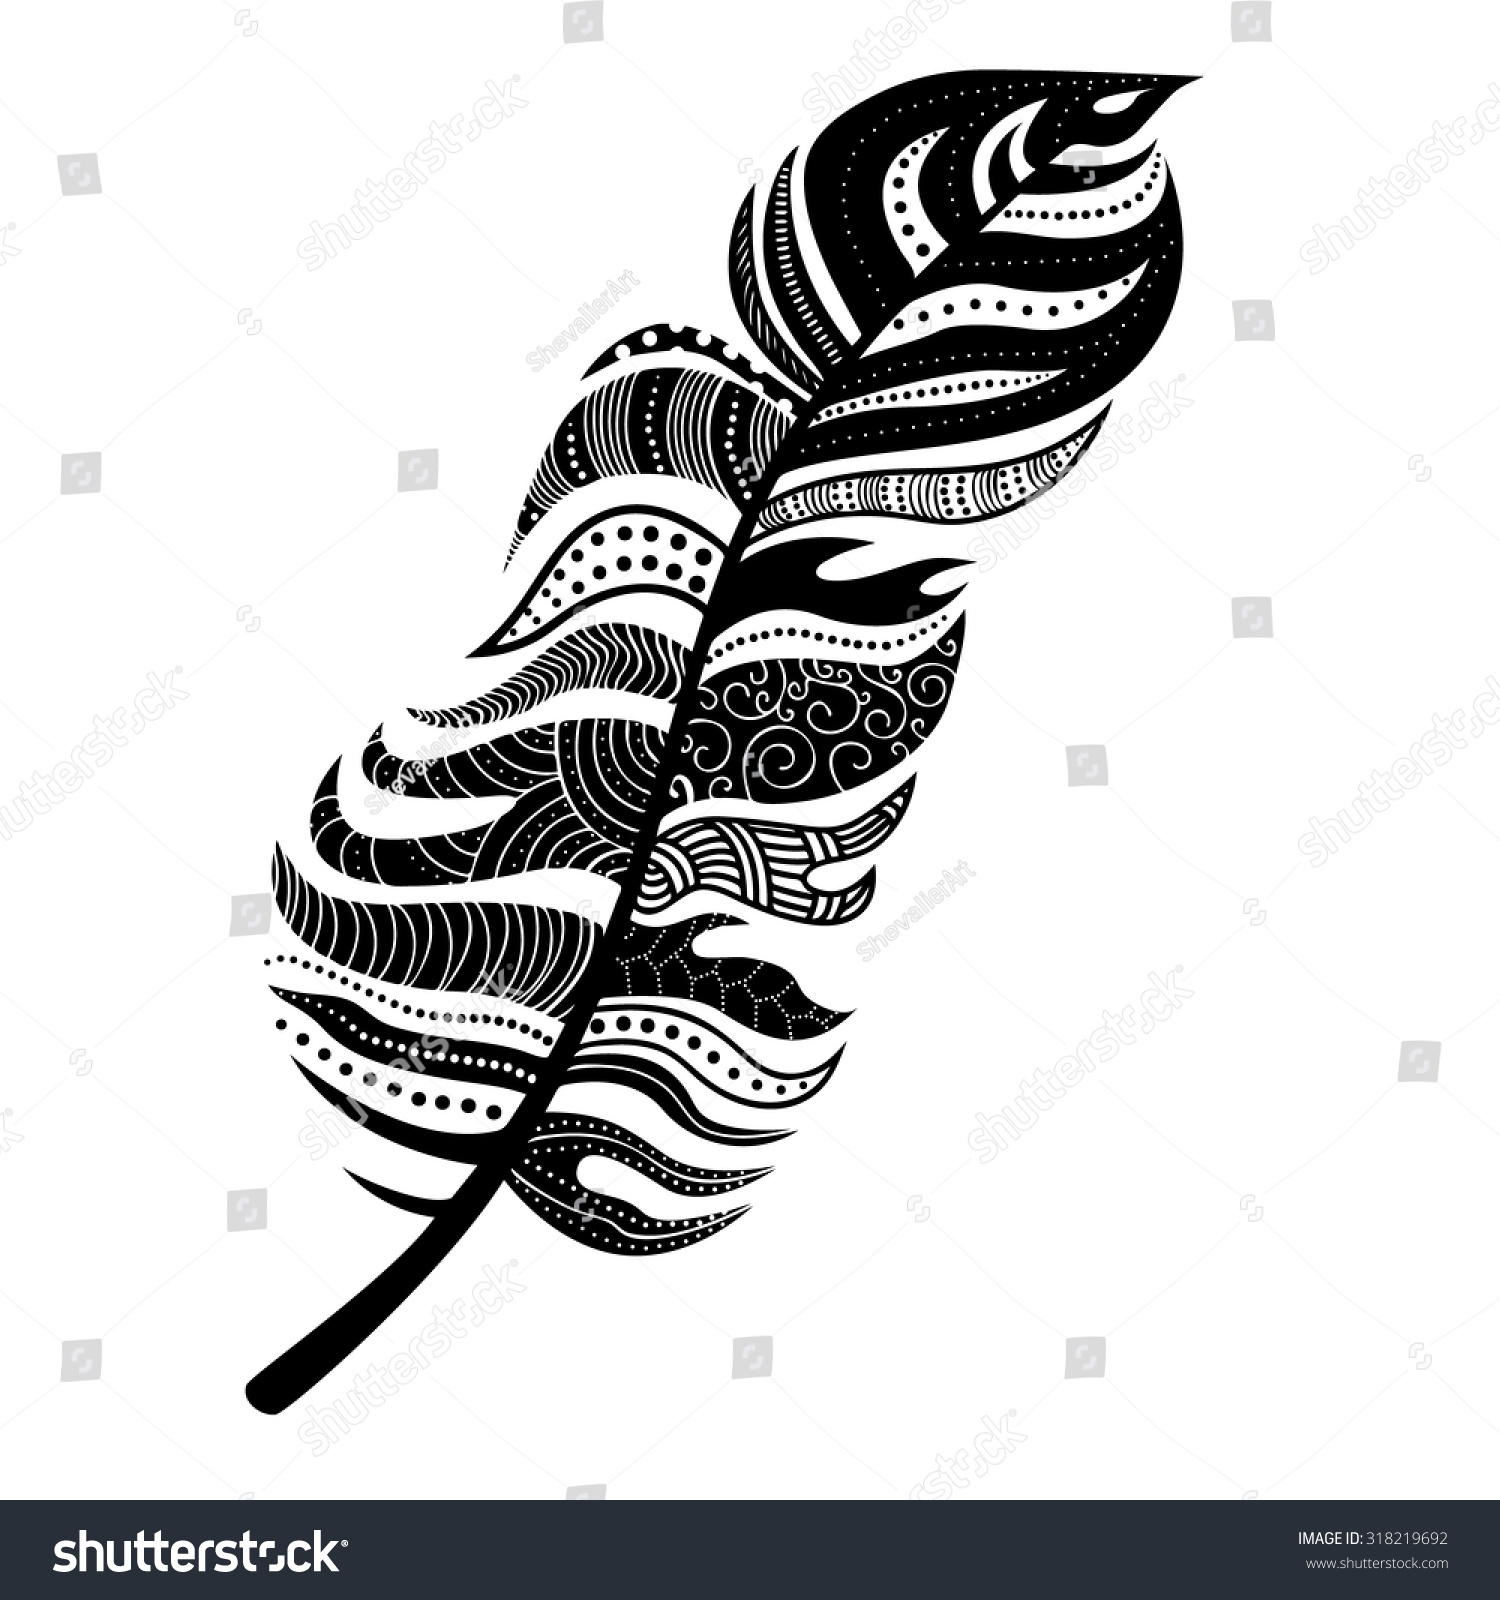 Decorative Stylized Feather Can Be Used Stock Vector 318219692 ...